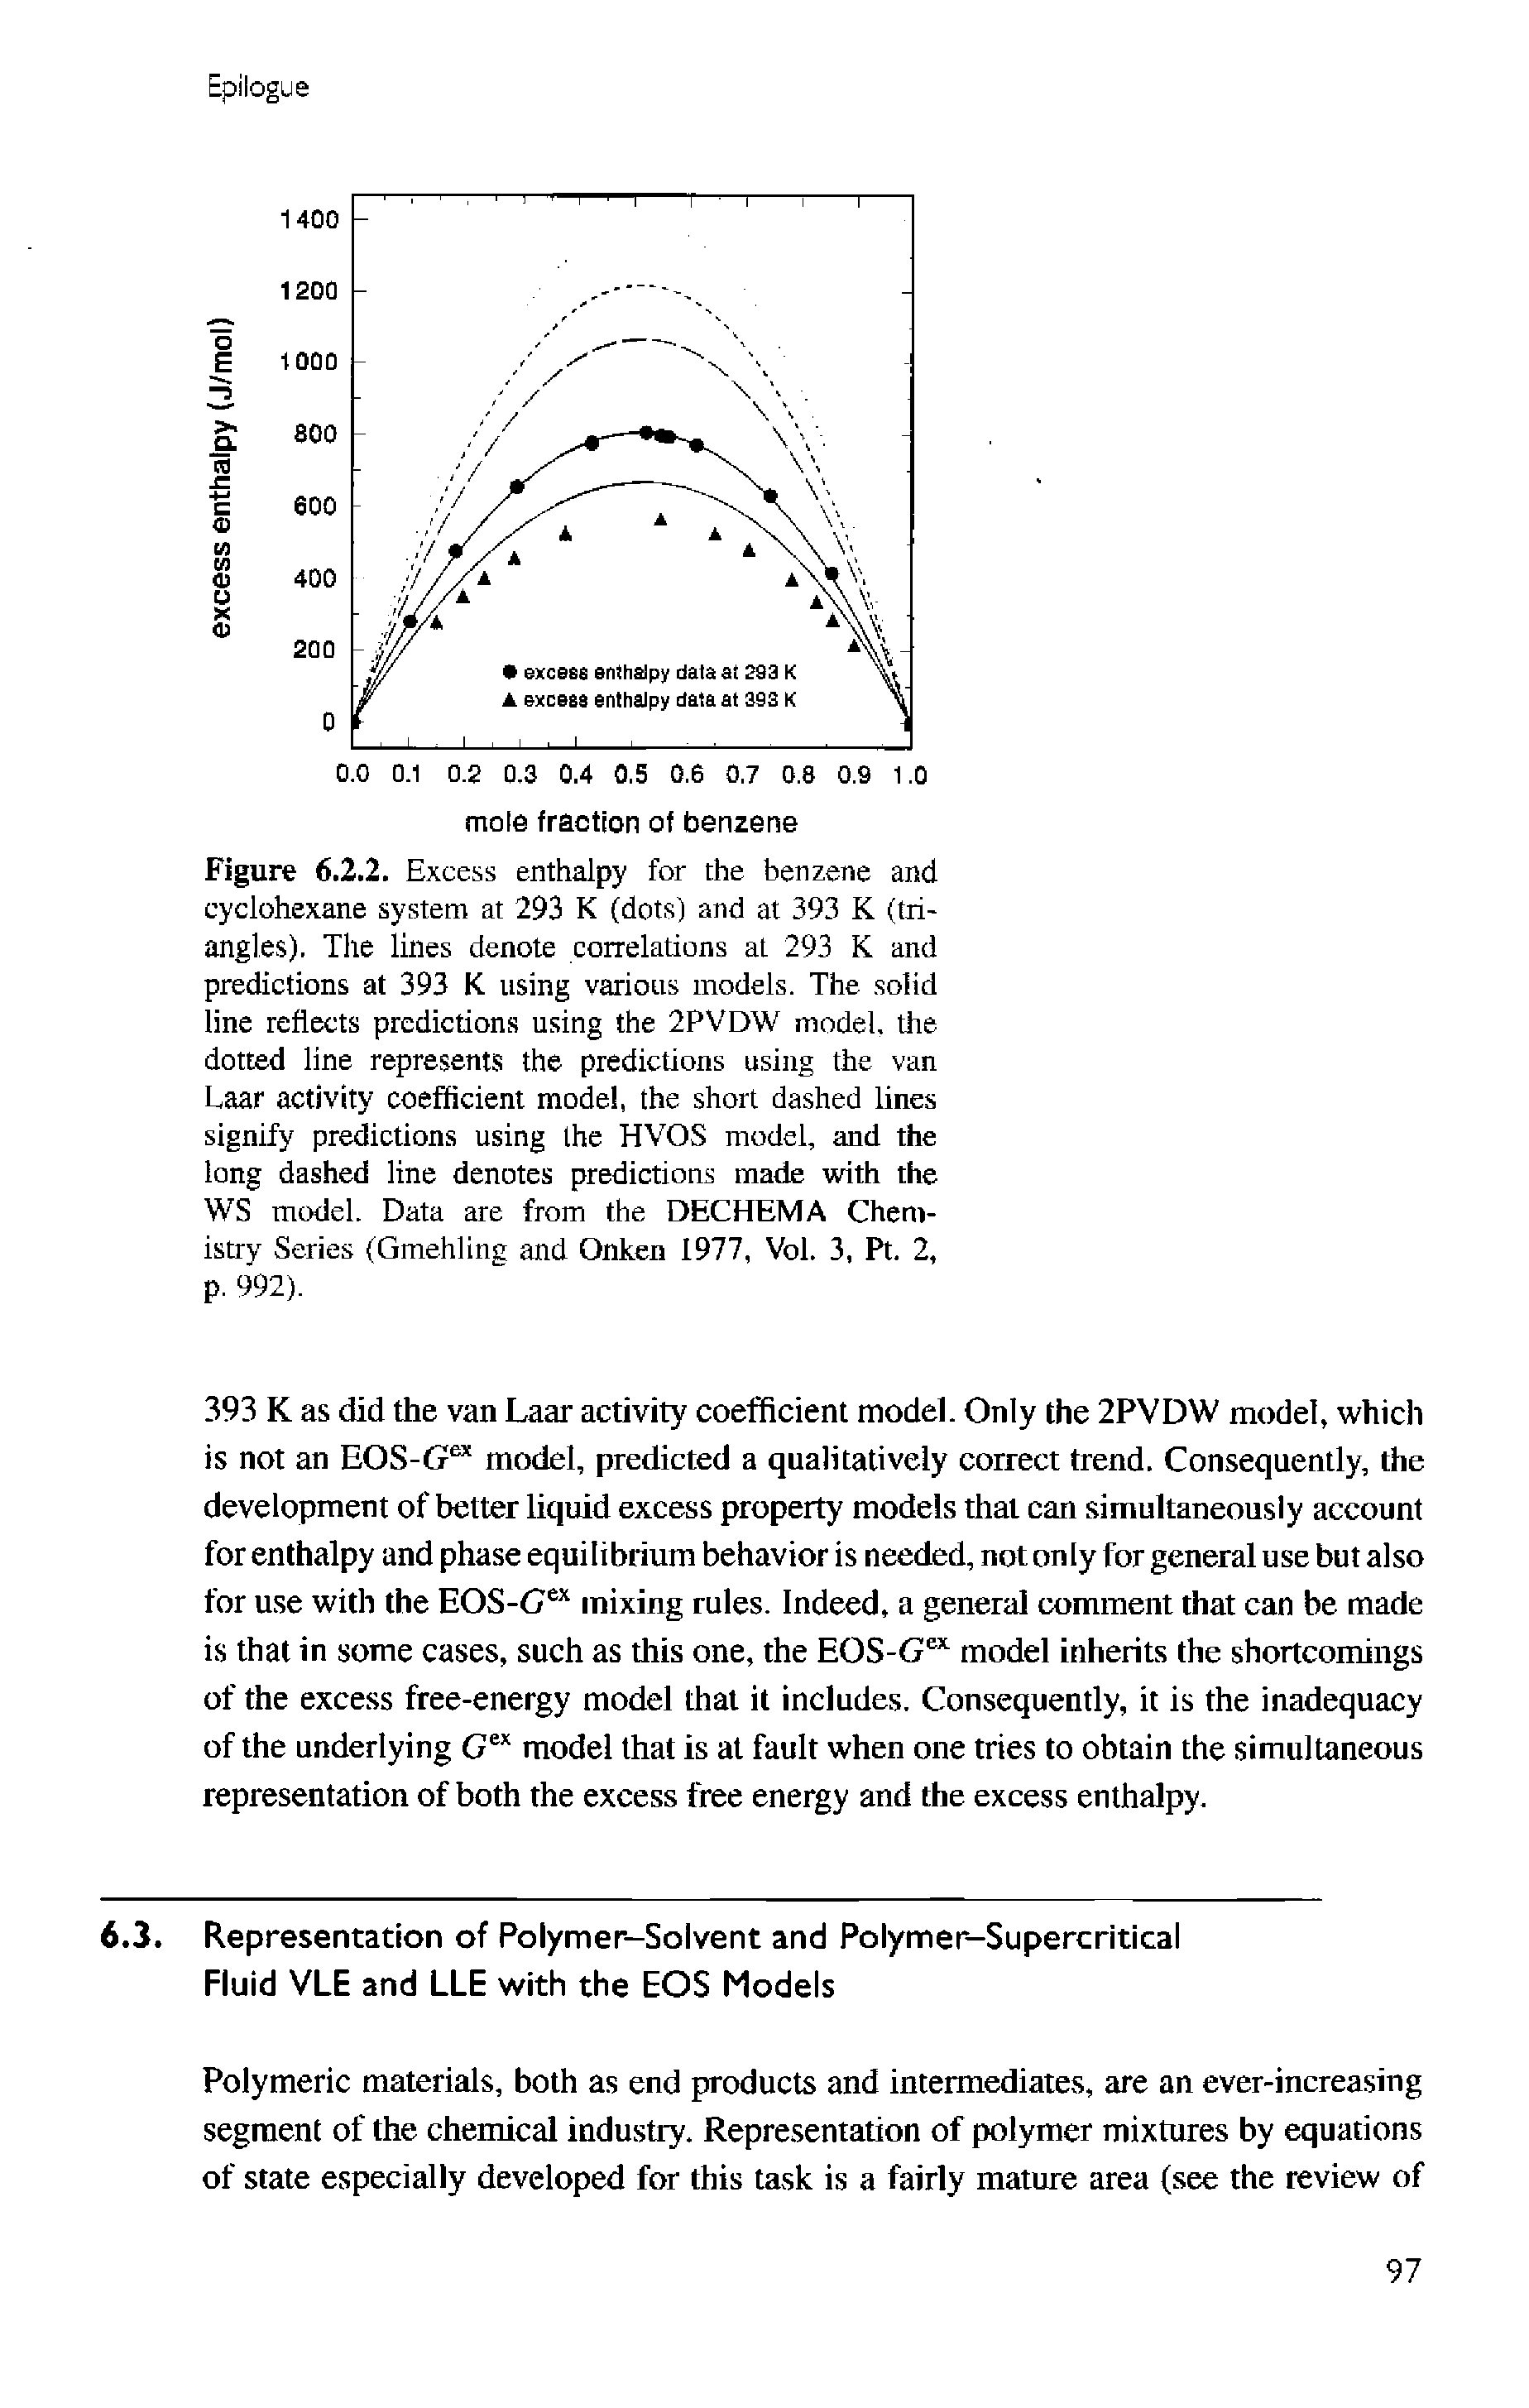 Figure 6.2.2. Excess enthalpy for the benzene and cyclohexane system at 293 K (dots) and at 393 K (triangles), Tlie lines denote correlations at 293 K and predictions at 393 K using various models. The solid line reflects predictions using the 2PVDW model, the dotted line represents the predictions using the van Laar activity coefficient mode , the short dashed lines signify predictions using the HVOS model, and the long dashed line denotes predictions made with the WS model. Data are from the DECHEMA Chemistry Series (Gmehling and Onken 1977, Vol. 3, Pt. 2, p. 992).